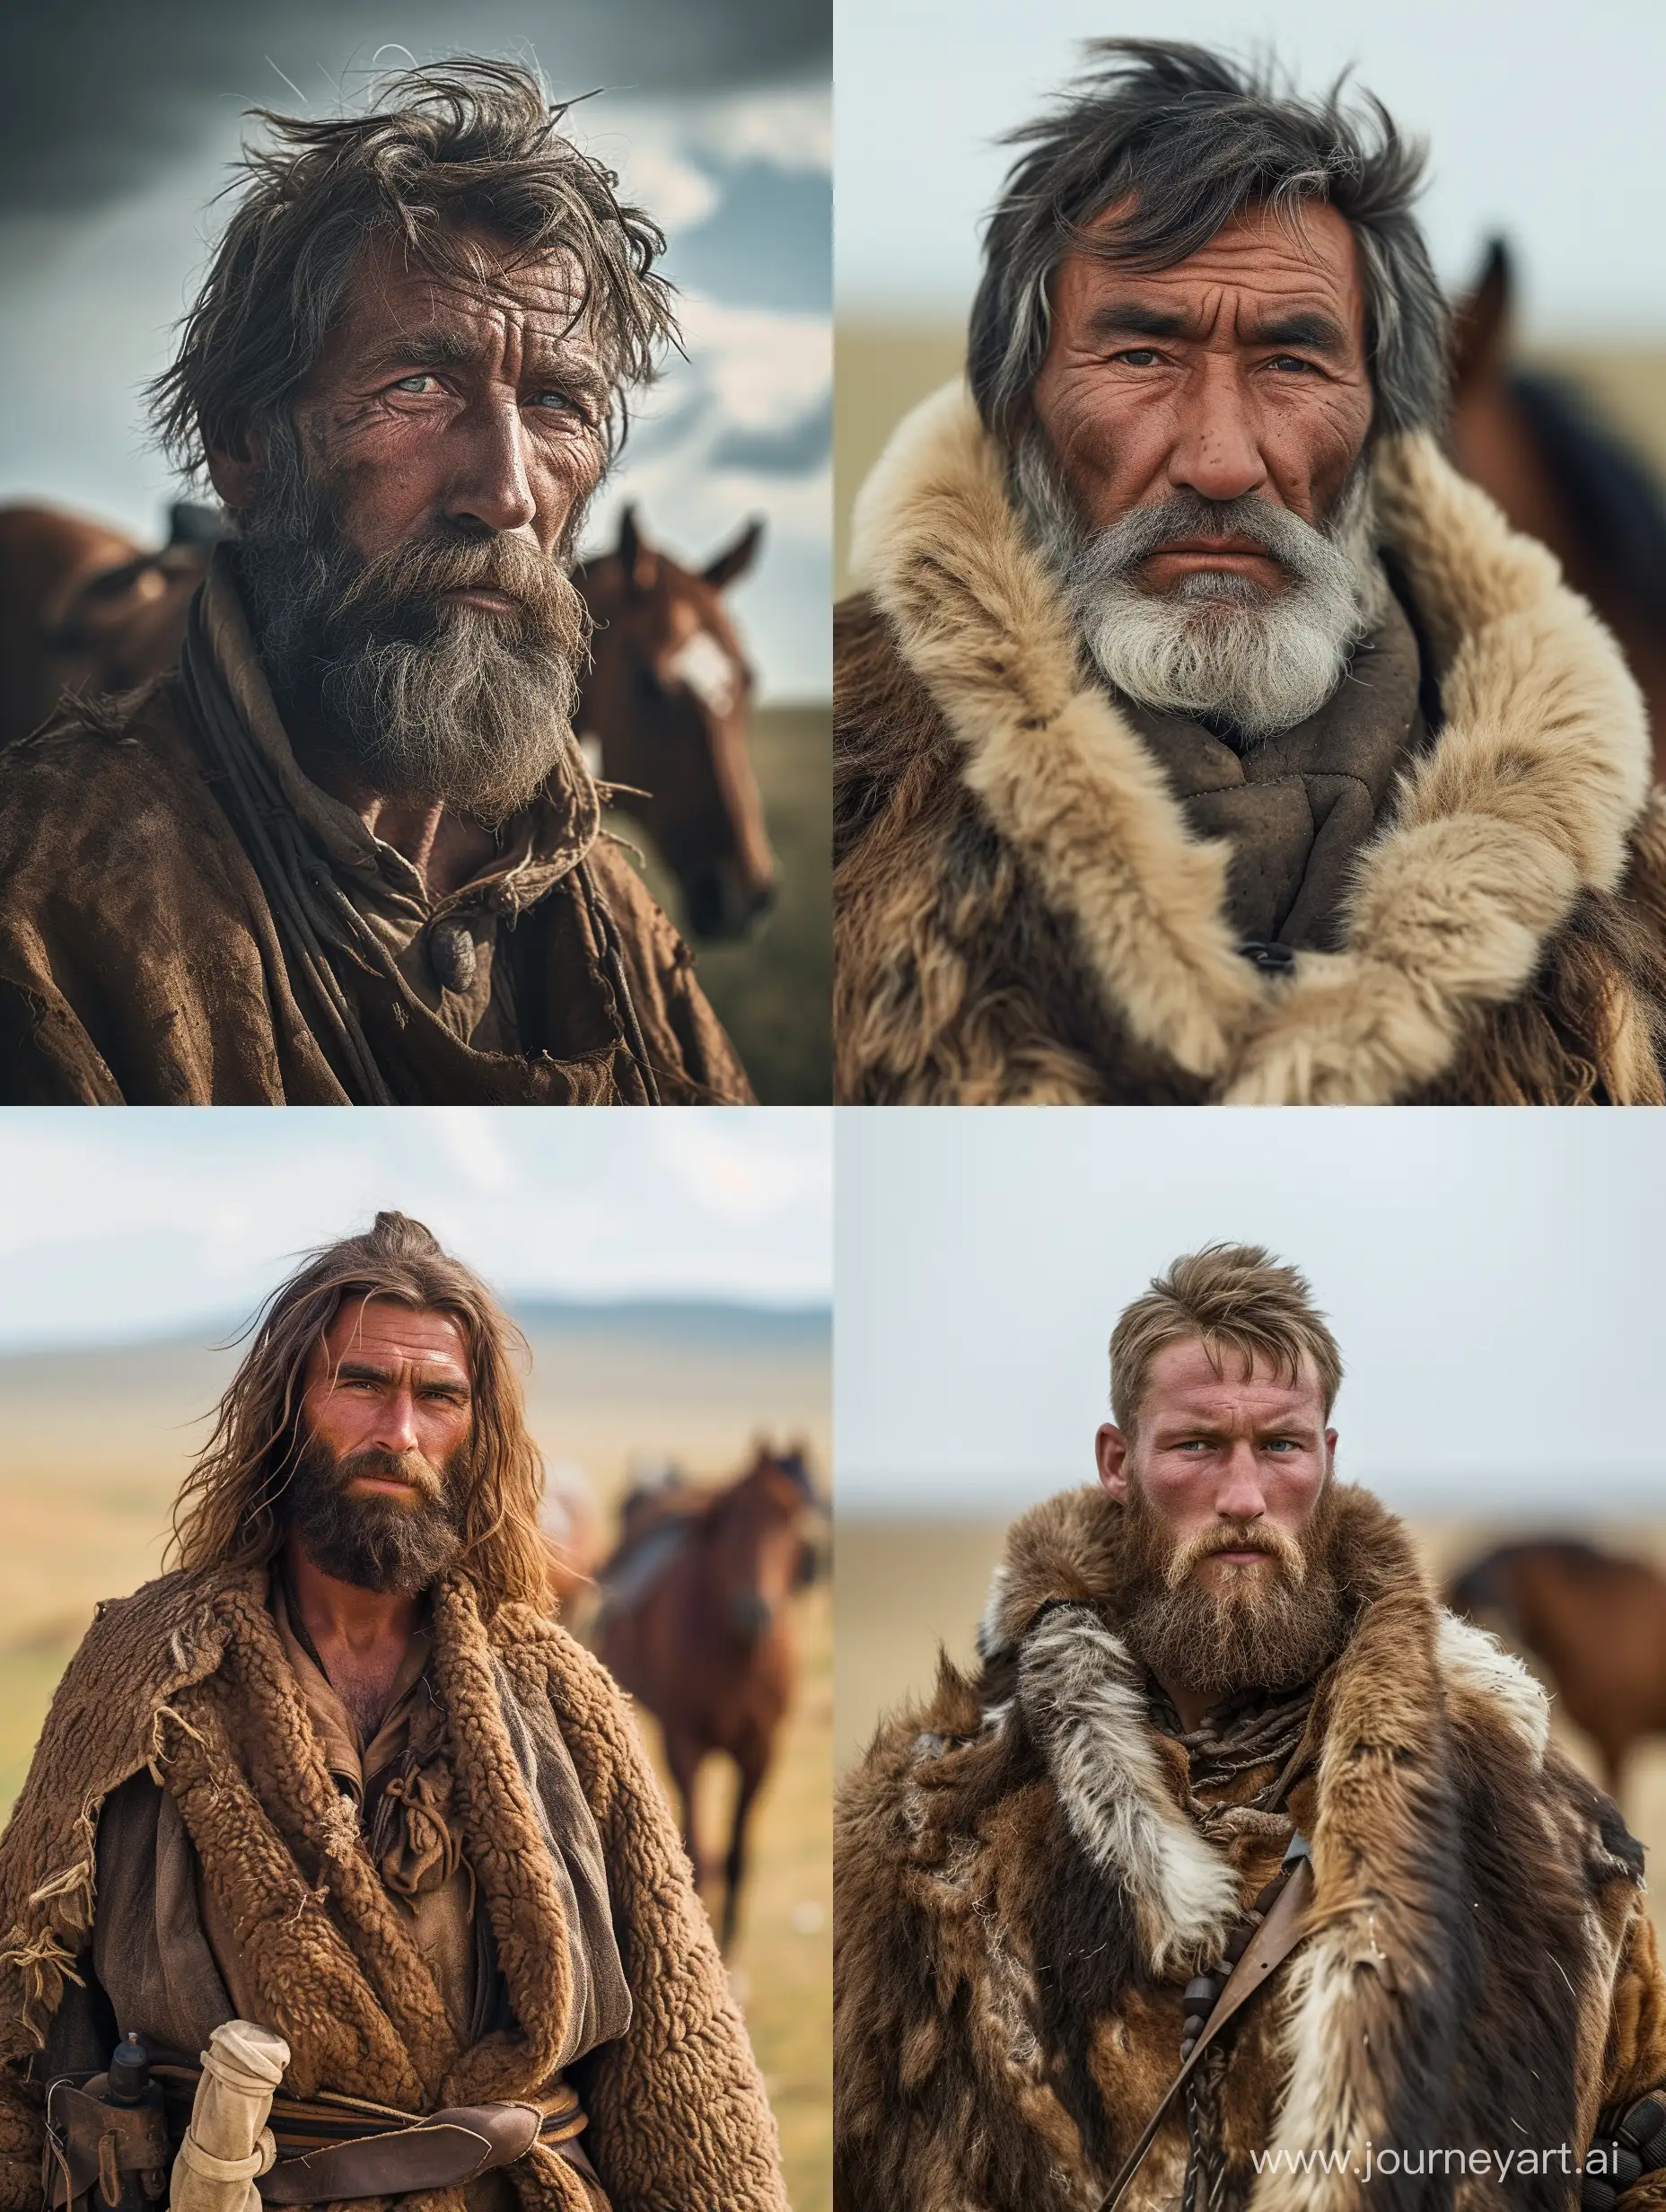 European-Steppe-Herder-Tall-Man-with-Horse-in-4K